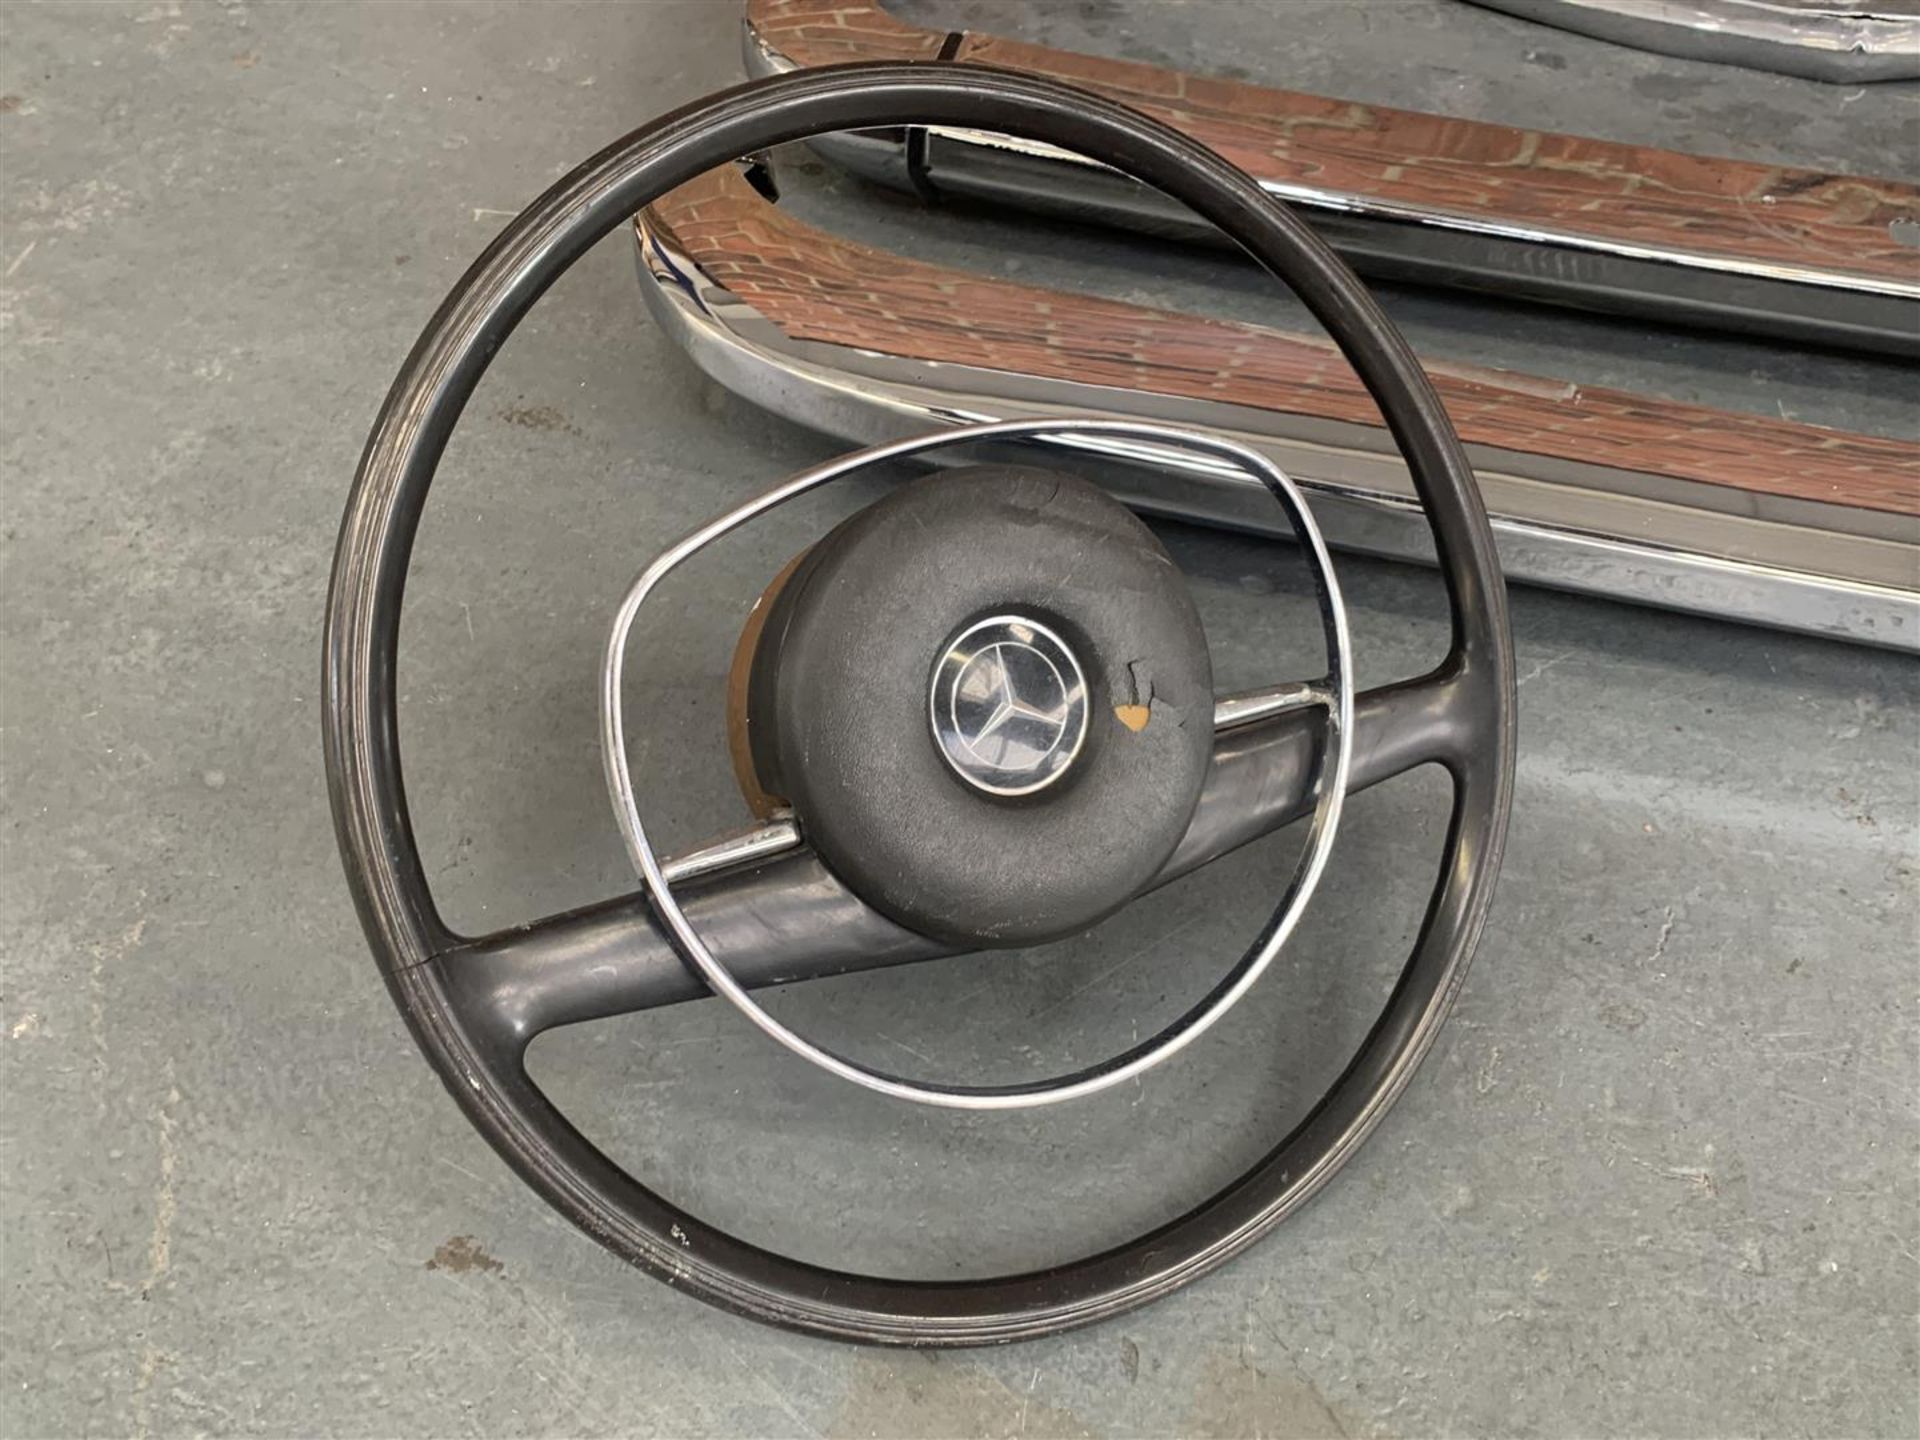 Mercedes SL Grille, Two Steering Wheels & Two Triumph Bumpers - Image 3 of 5